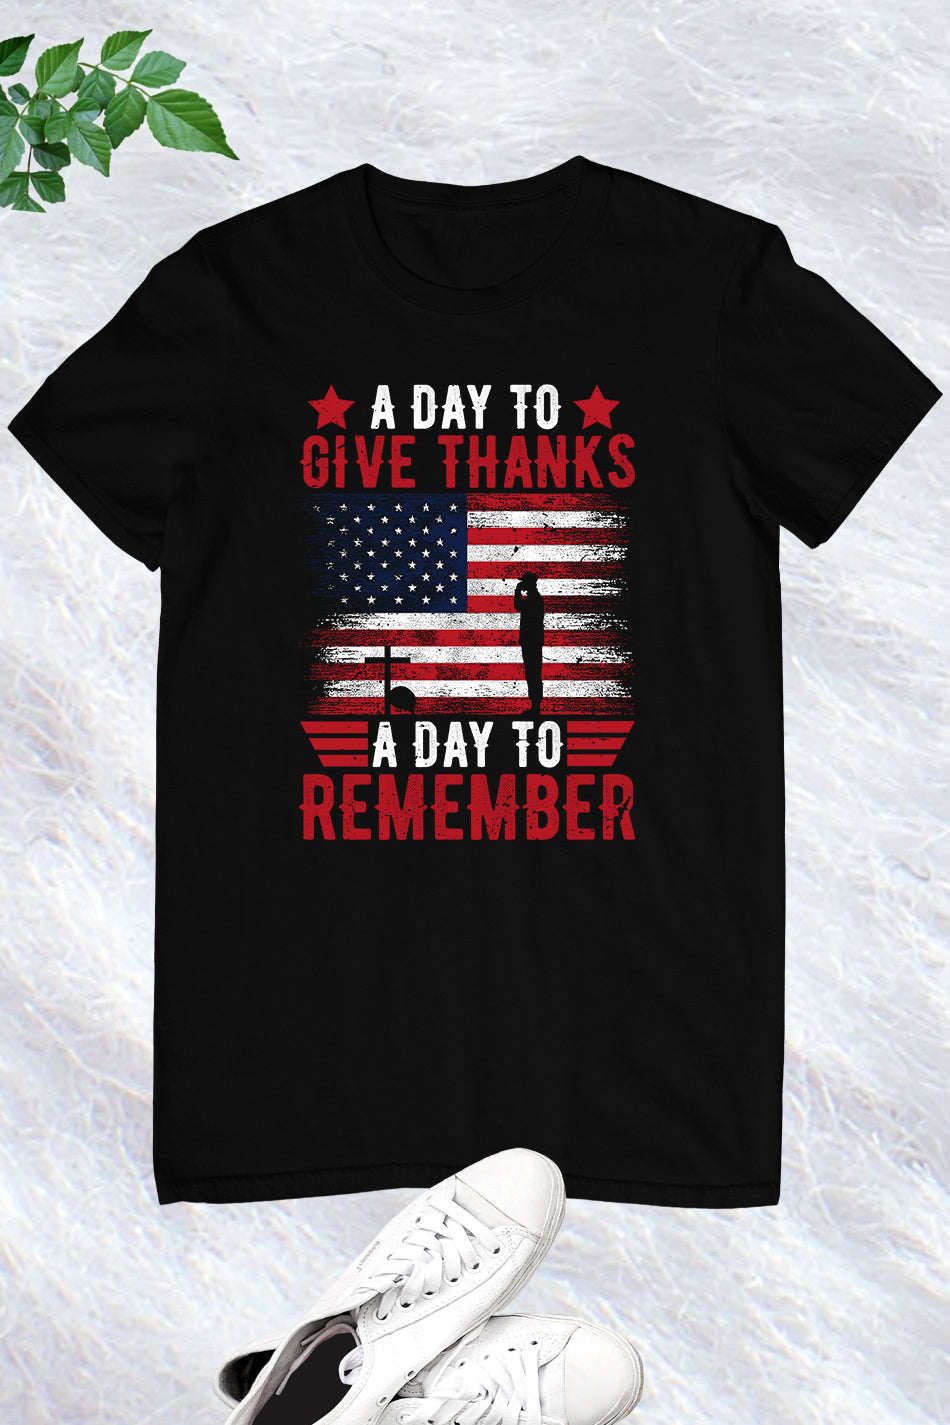 A Day to Give Thanks a Day to Remember Shirts